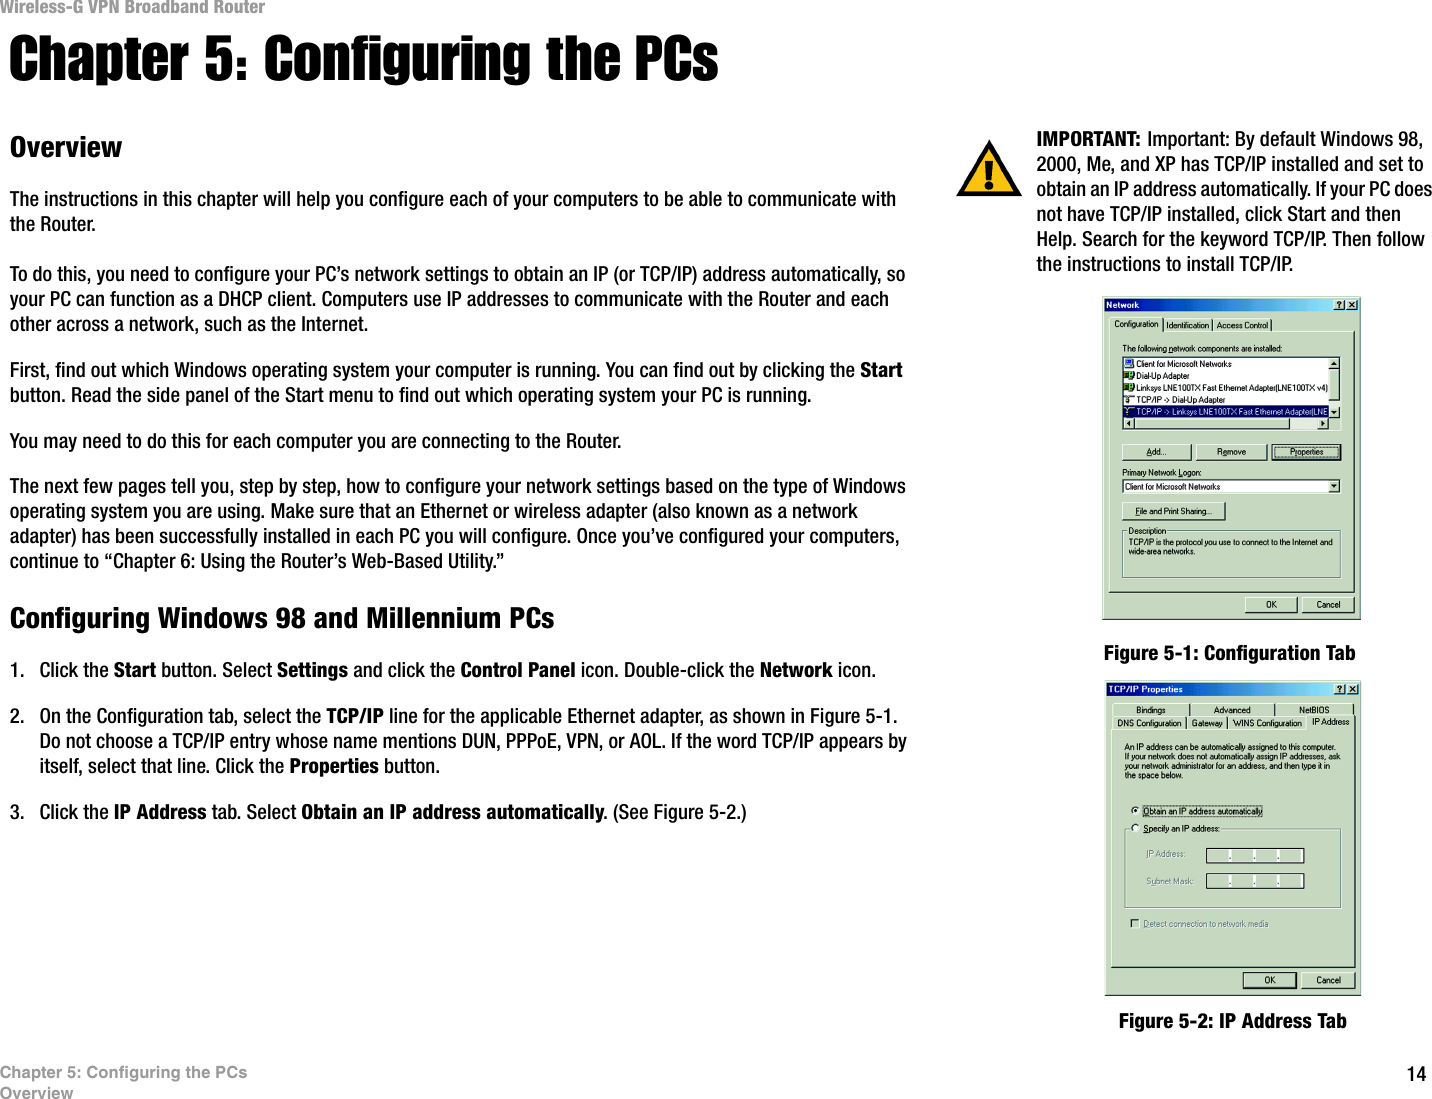 14Chapter 5: Configuring the PCsOverviewWireless-G VPN Broadband RouterChapter 5: Configuring the PCsOverviewThe instructions in this chapter will help you configure each of your computers to be able to communicate with the Router.To do this, you need to configure your PC’s network settings to obtain an IP (or TCP/IP) address automatically, so your PC can function as a DHCP client. Computers use IP addresses to communicate with the Router and each other across a network, such as the Internet. First, find out which Windows operating system your computer is running. You can find out by clicking the Start button. Read the side panel of the Start menu to find out which operating system your PC is running.You may need to do this for each computer you are connecting to the Router.The next few pages tell you, step by step, how to configure your network settings based on the type of Windows operating system you are using. Make sure that an Ethernet or wireless adapter (also known as a network adapter) has been successfully installed in each PC you will configure. Once you’ve configured your computers, continue to “Chapter 6: Using the Router’s Web-Based Utility.”Configuring Windows 98 and Millennium PCs1. Click the Start button. Select Settings and click the Control Panel icon. Double-click the Network icon.2. On the Configuration tab, select the TCP/IP line for the applicable Ethernet adapter, as shown in Figure 5-1. Do not choose a TCP/IP entry whose name mentions DUN, PPPoE, VPN, or AOL. If the word TCP/IP appears by itself, select that line. Click the Properties button.3. Click the IP Address tab. Select Obtain an IP address automatically. (See Figure 5-2.) IMPORTANT: Important: By default Windows 98, 2000, Me, and XP has TCP/IP installed and set to obtain an IP address automatically. If your PC does not have TCP/IP installed, click Start and then Help. Search for the keyword TCP/IP. Then follow the instructions to install TCP/IP.Figure 5-1: Configuration TabFigure 5-2: IP Address Tab